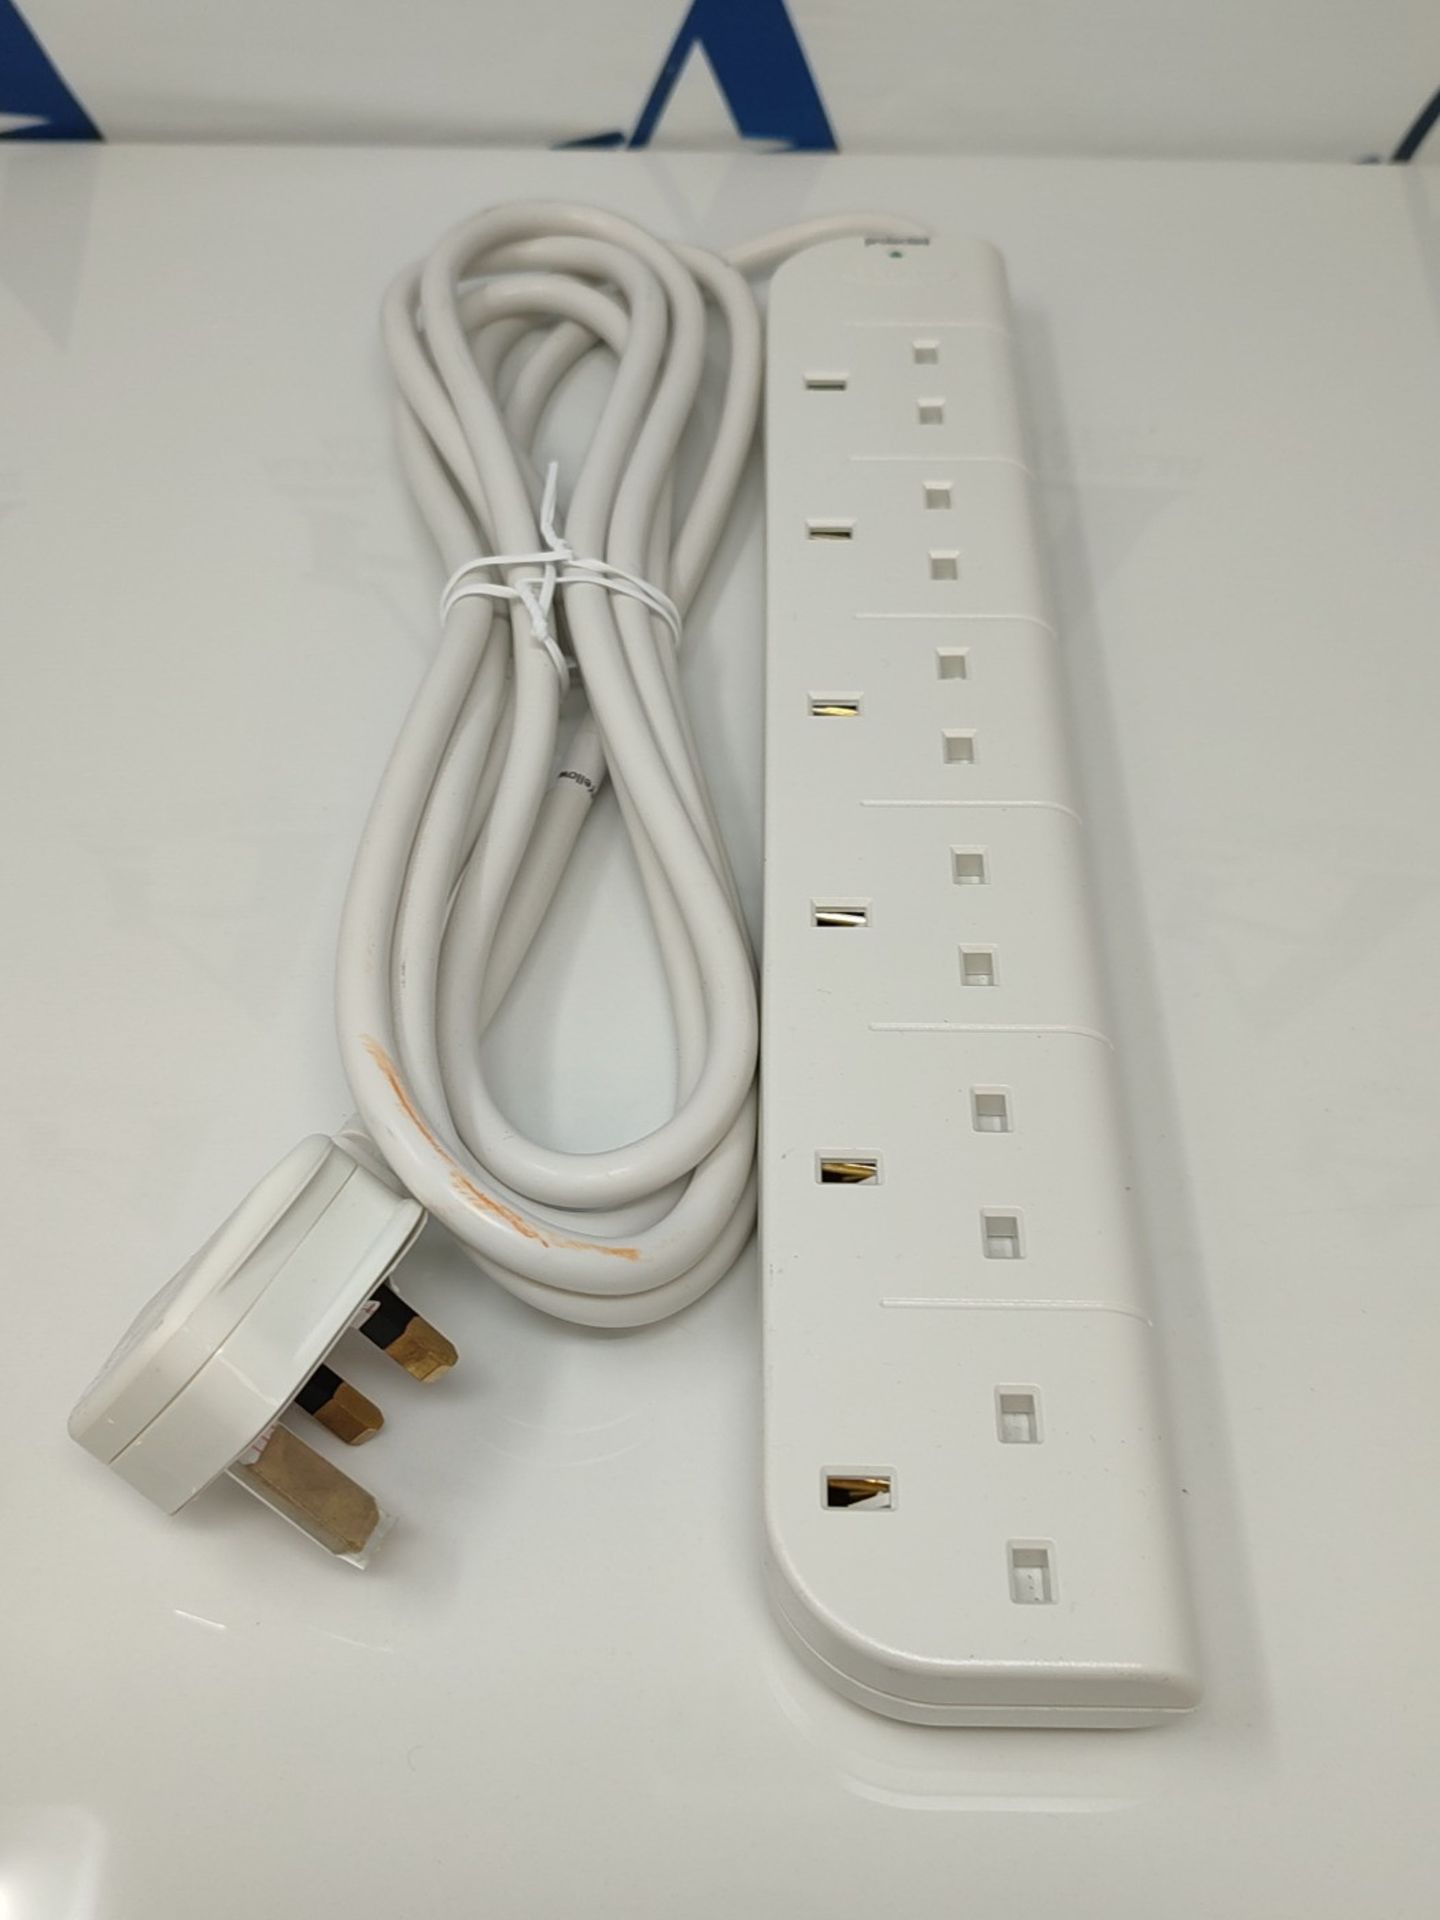 Belkin E-Series 6 Plug SurgeStrip Surge Protected Extension Lead - 3 m, White - Image 3 of 3